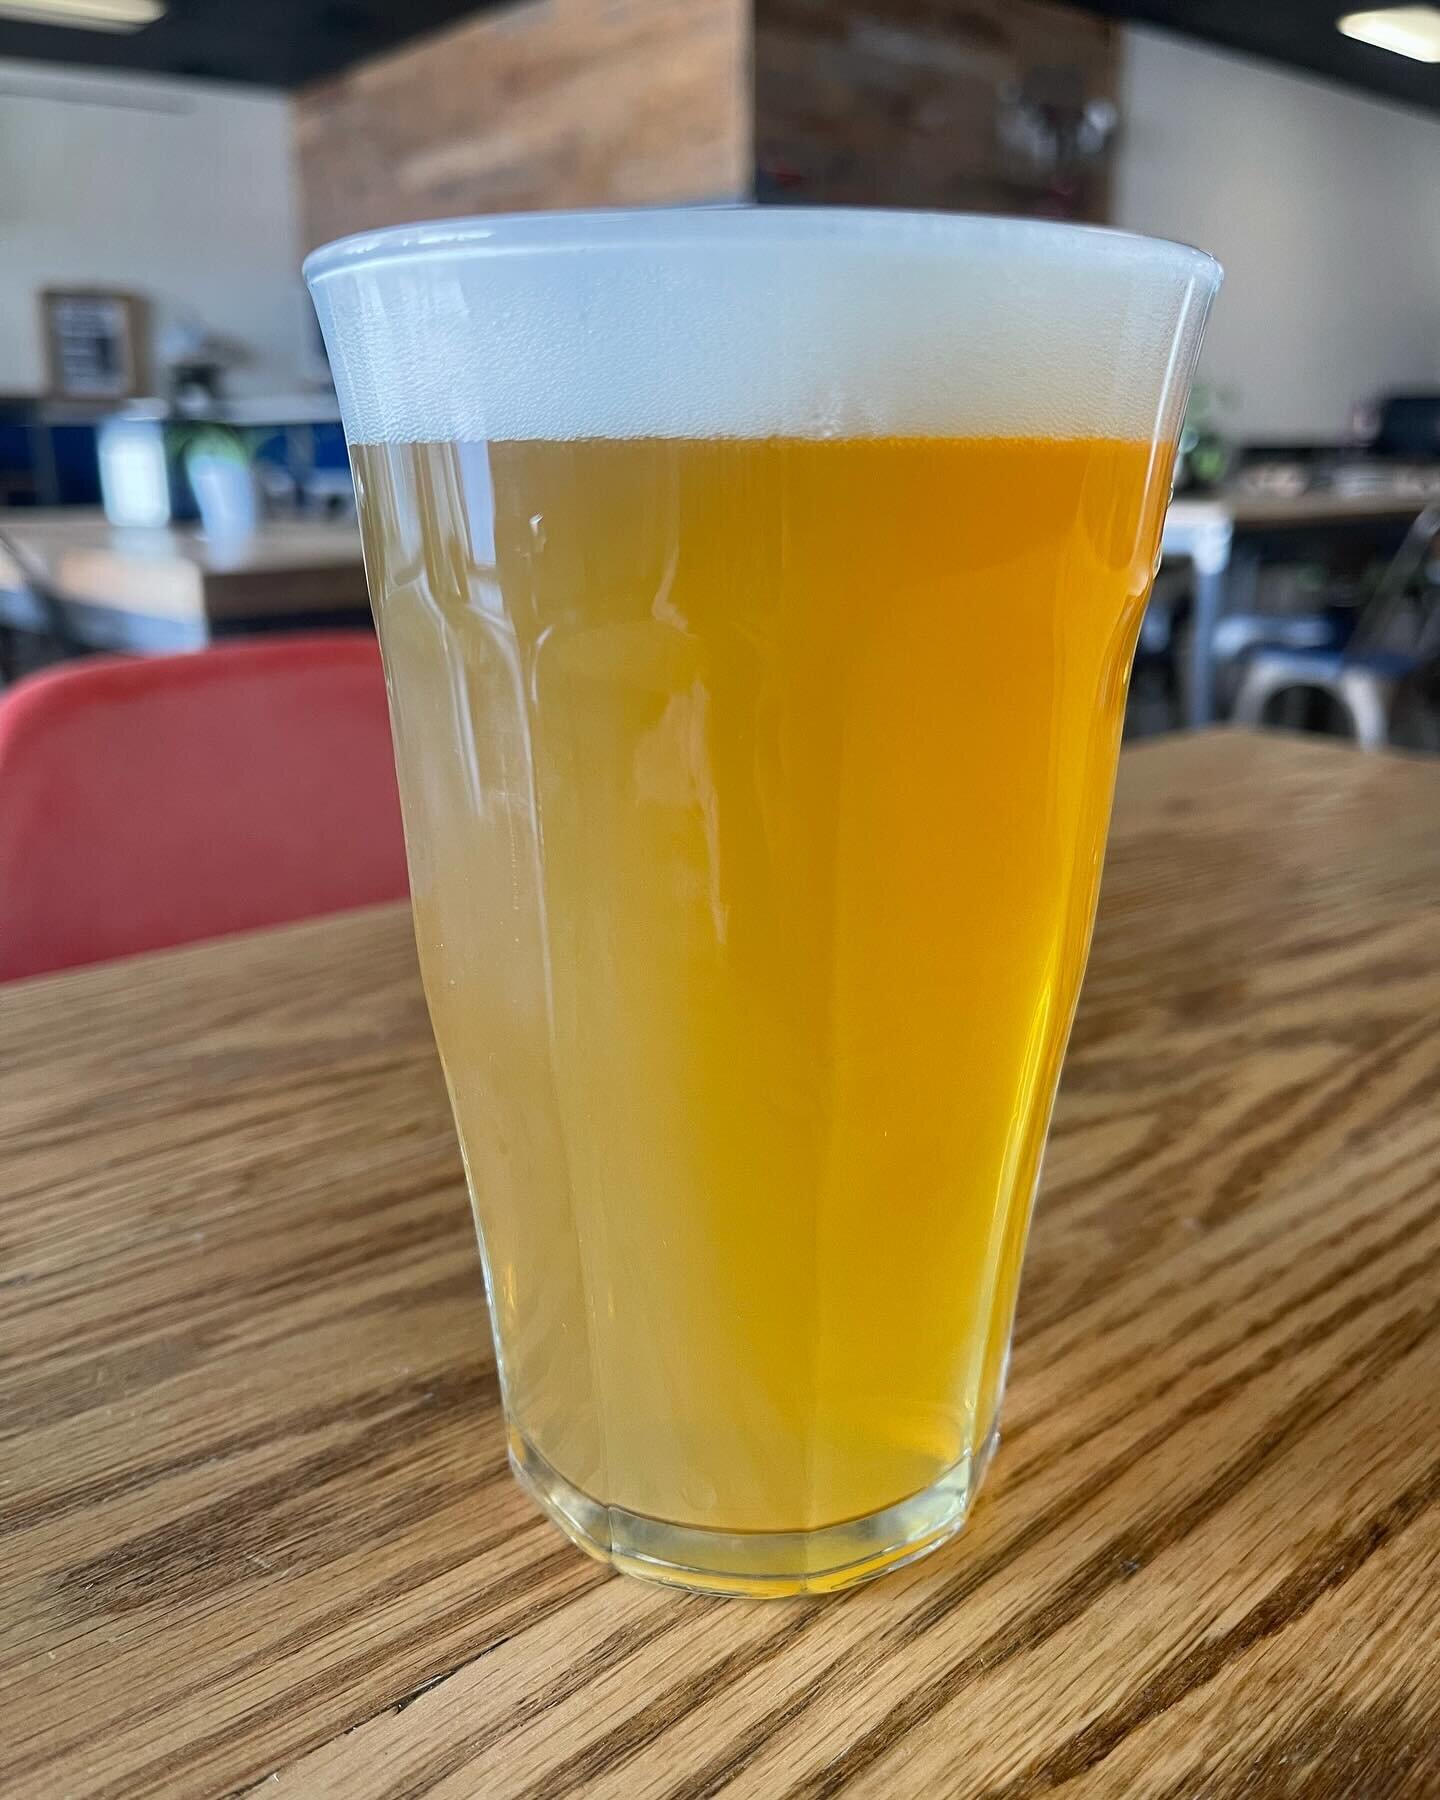 ICYMI we have a &lsquo;Hazy&rsquo; on now. What began as a &lsquo;juicy&rsquo; take on a newer-school American Pale has morphed into what we are calling a &lsquo;Hazy IPA&rsquo;. 

Is it #hazyboi certified? Not sure. Probably not: as our goal isn&rsq